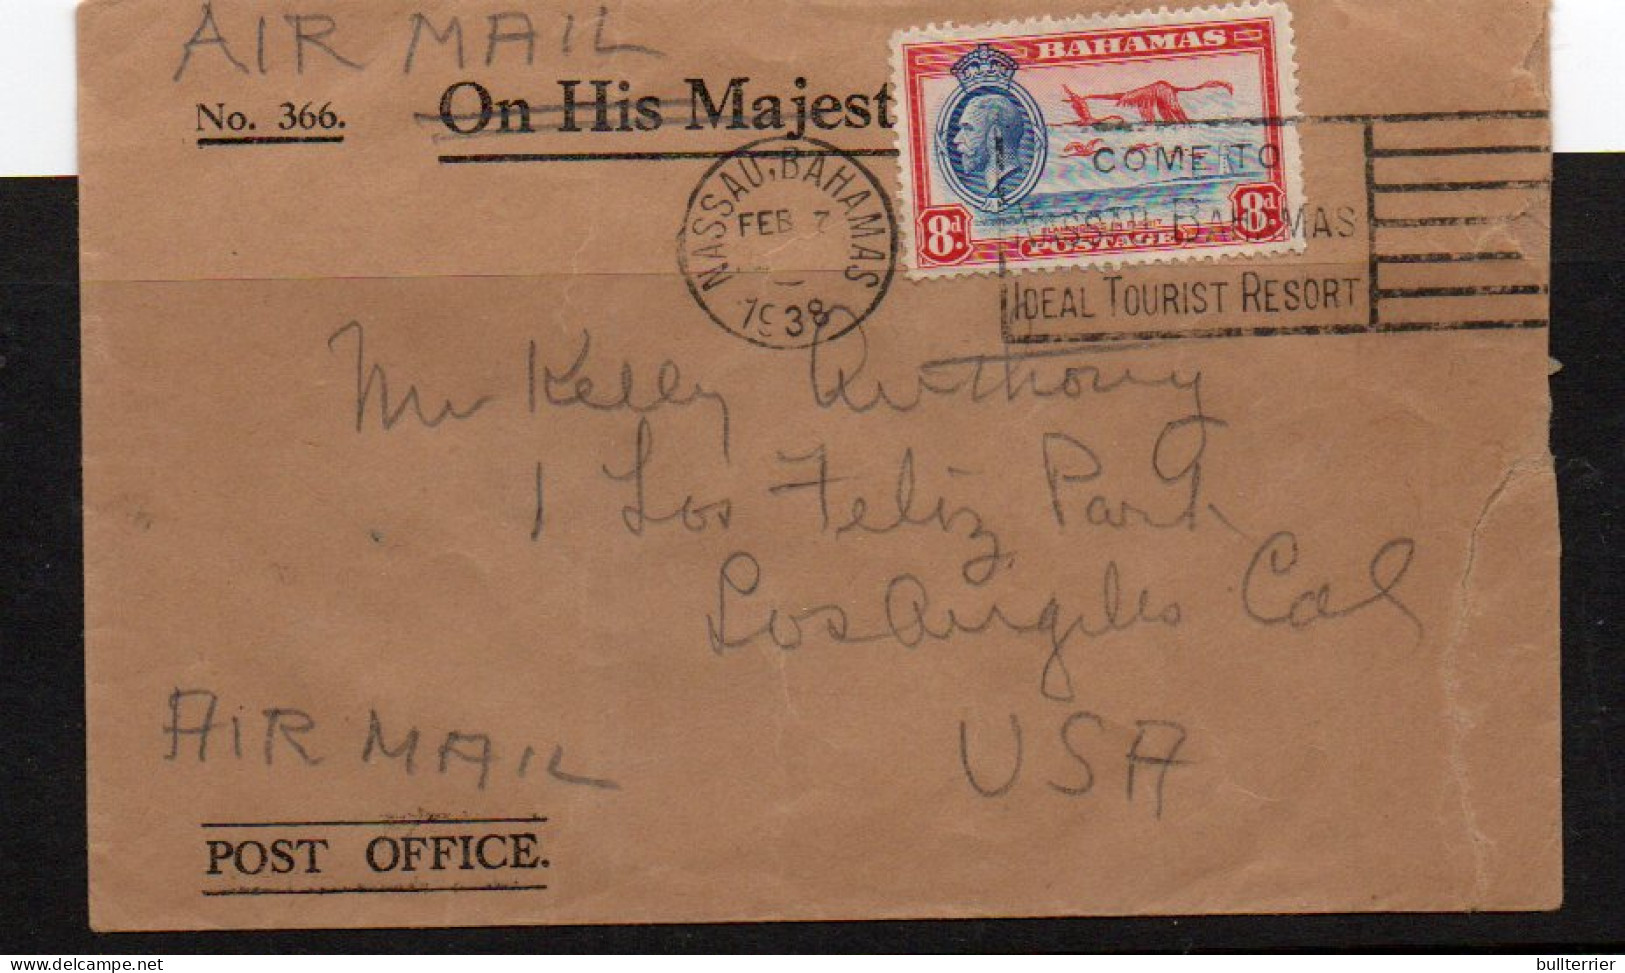 BAHAMAS - 1938 - AIRMAIL COVER TO LOS ANGLES FRANKED 8D FLAMINGO  - 1859-1963 Colonie Britannique